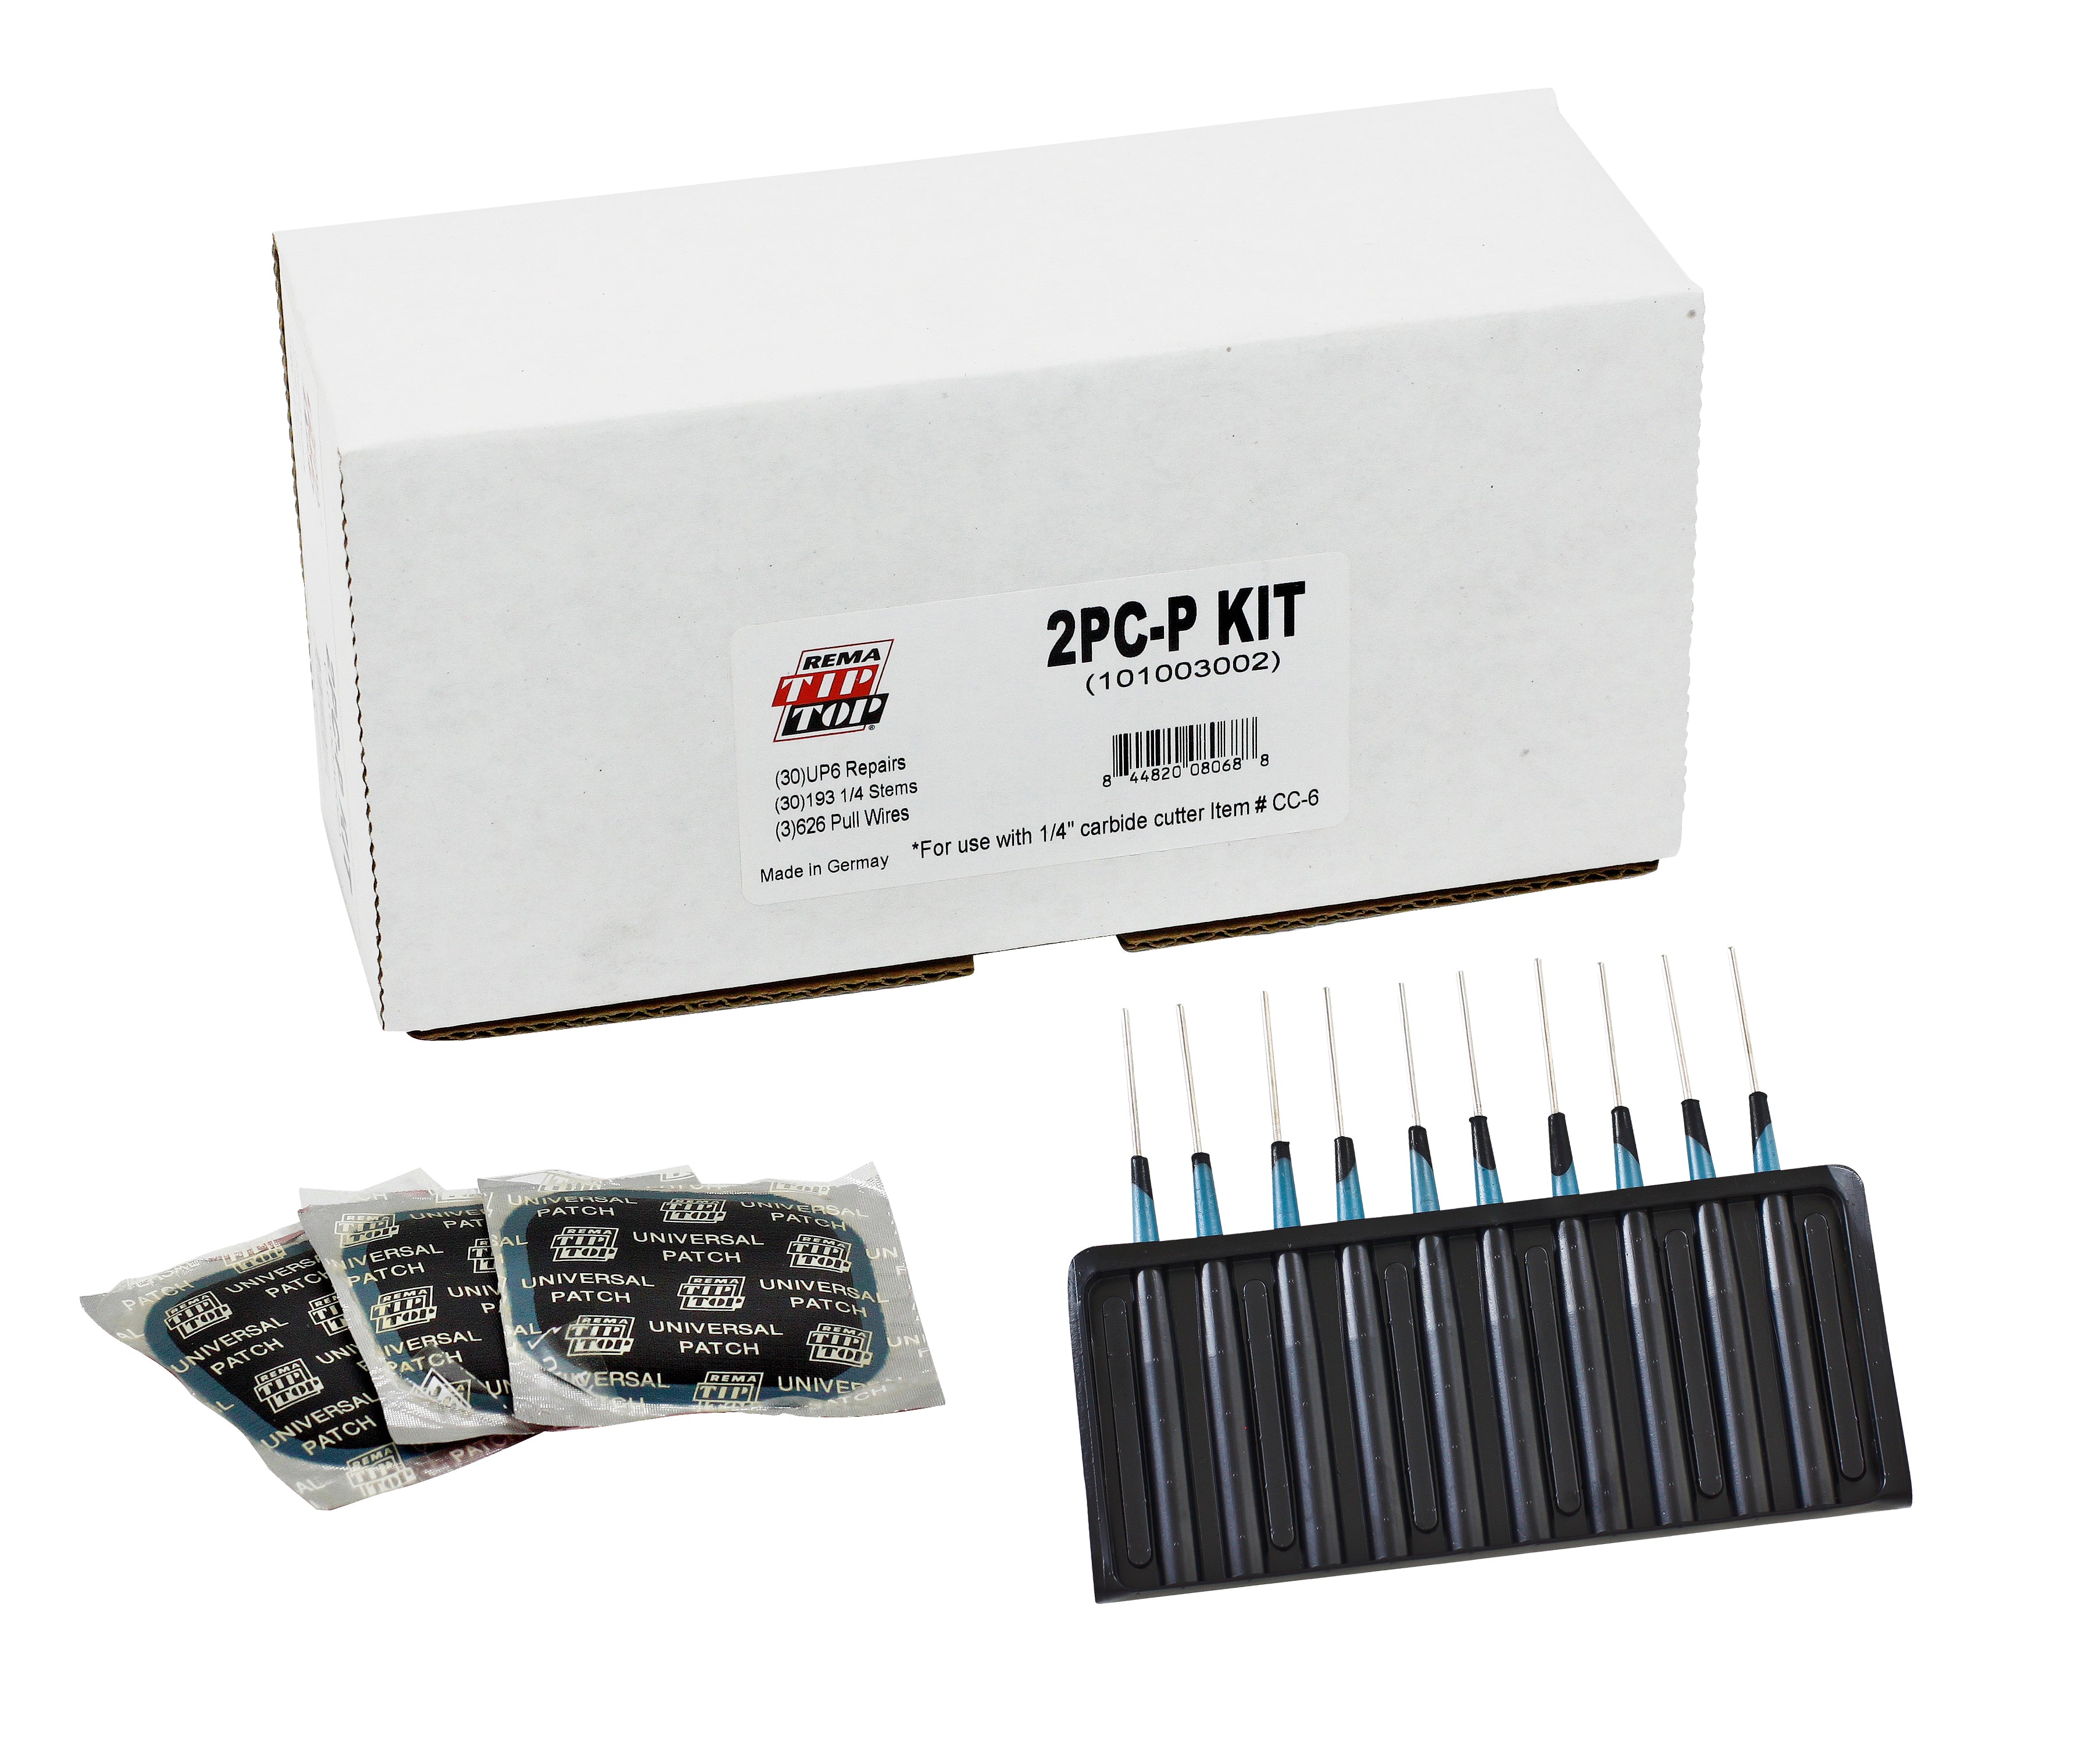 Rema Tire Repair Kit, UP6 Patch (30), 193 Stem (30) & 626 Pulling Wires (3)